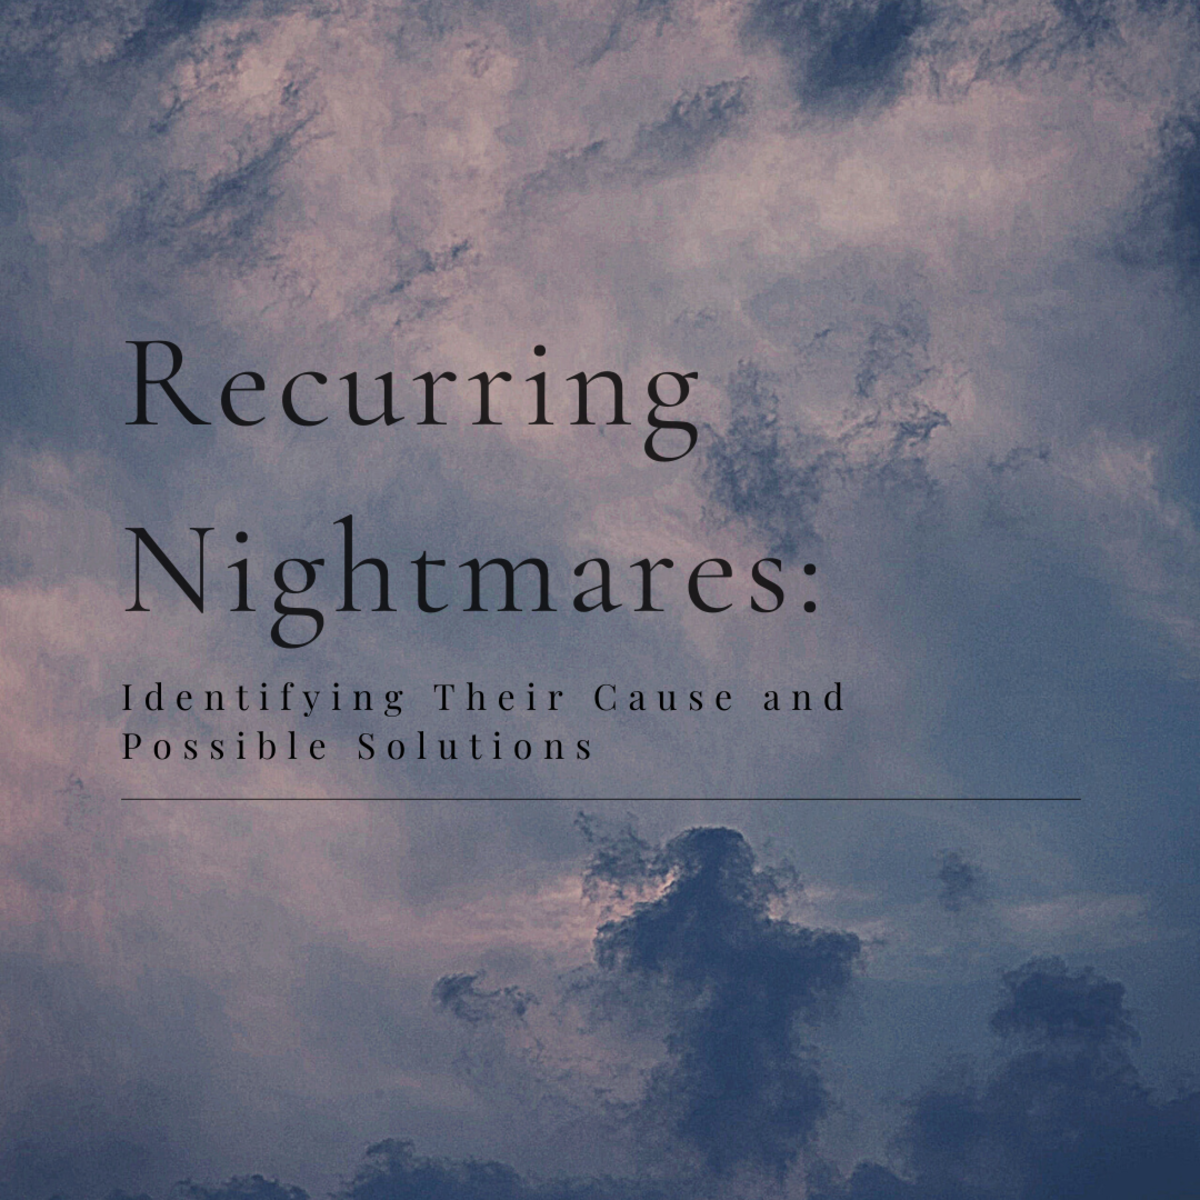 There are a few reasons why an individual might have repeated nightmares.